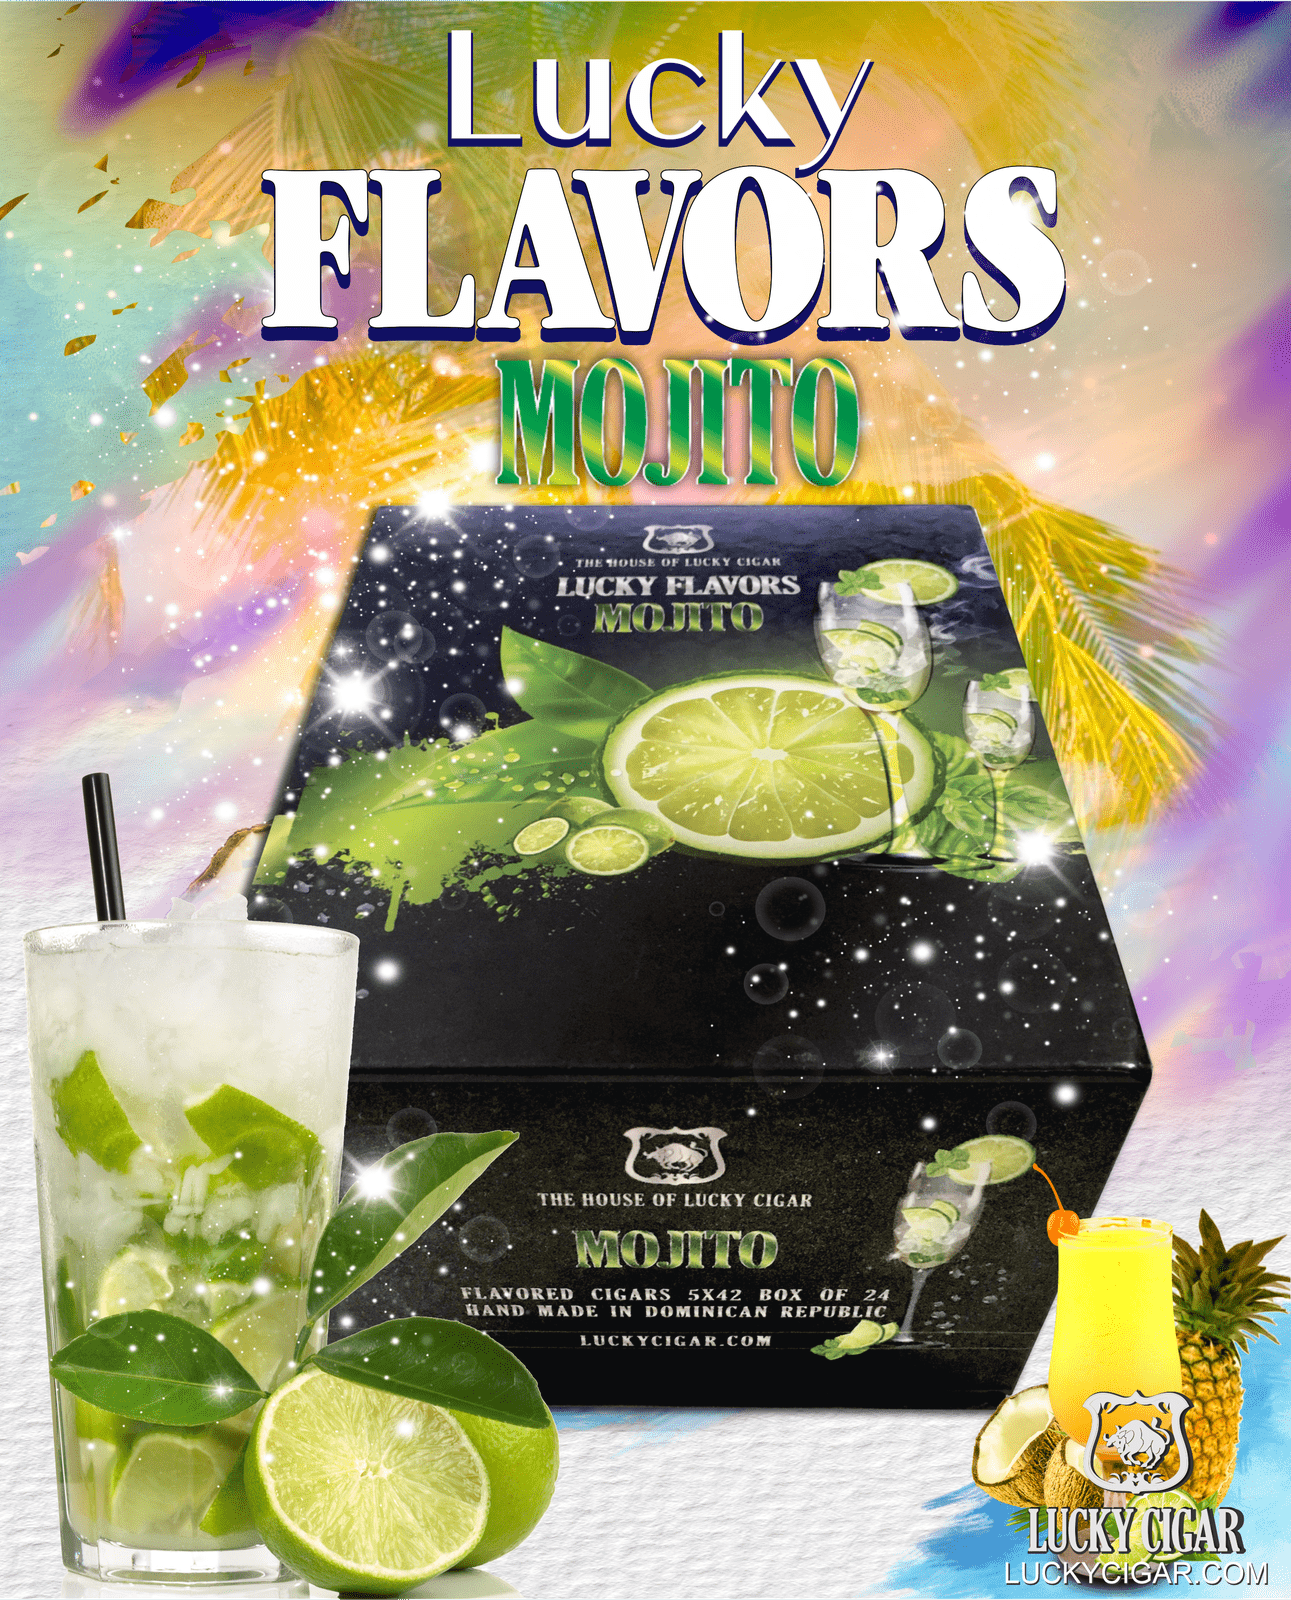 Flavored Cigars: Lucky Flavors Mojito Rum 5x42 Box of 24 Cigars